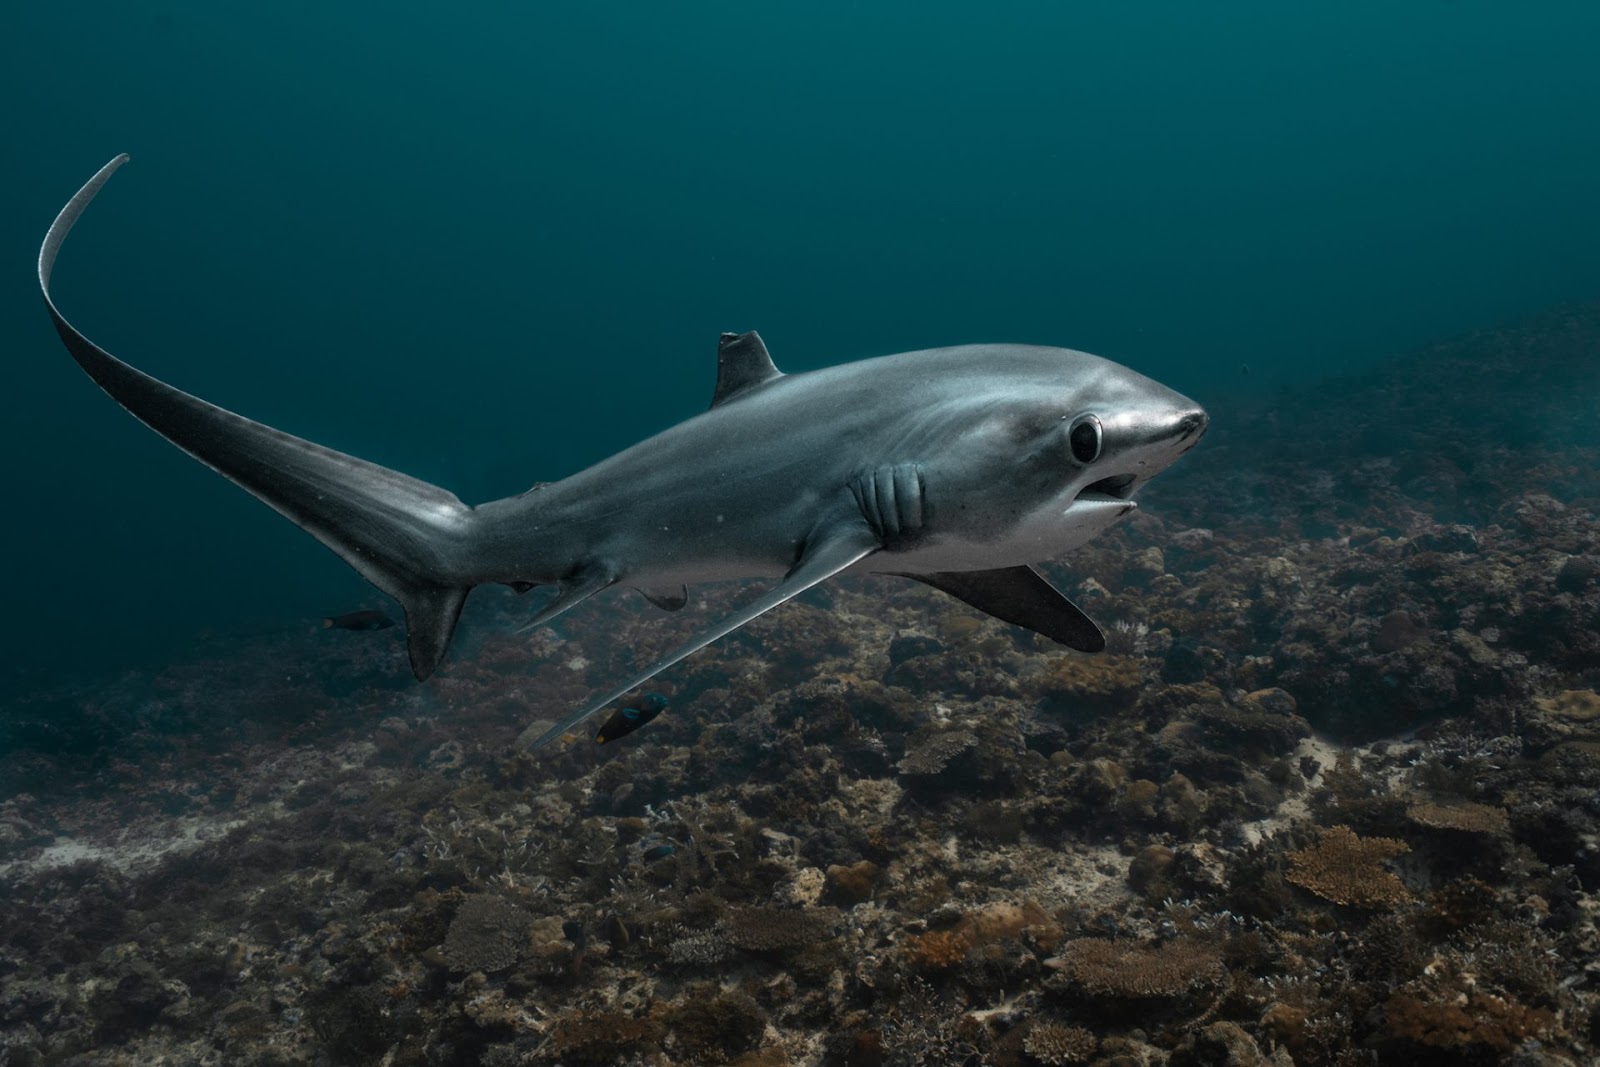 A photo of a Thresher shark in Malapascua, Philippines.